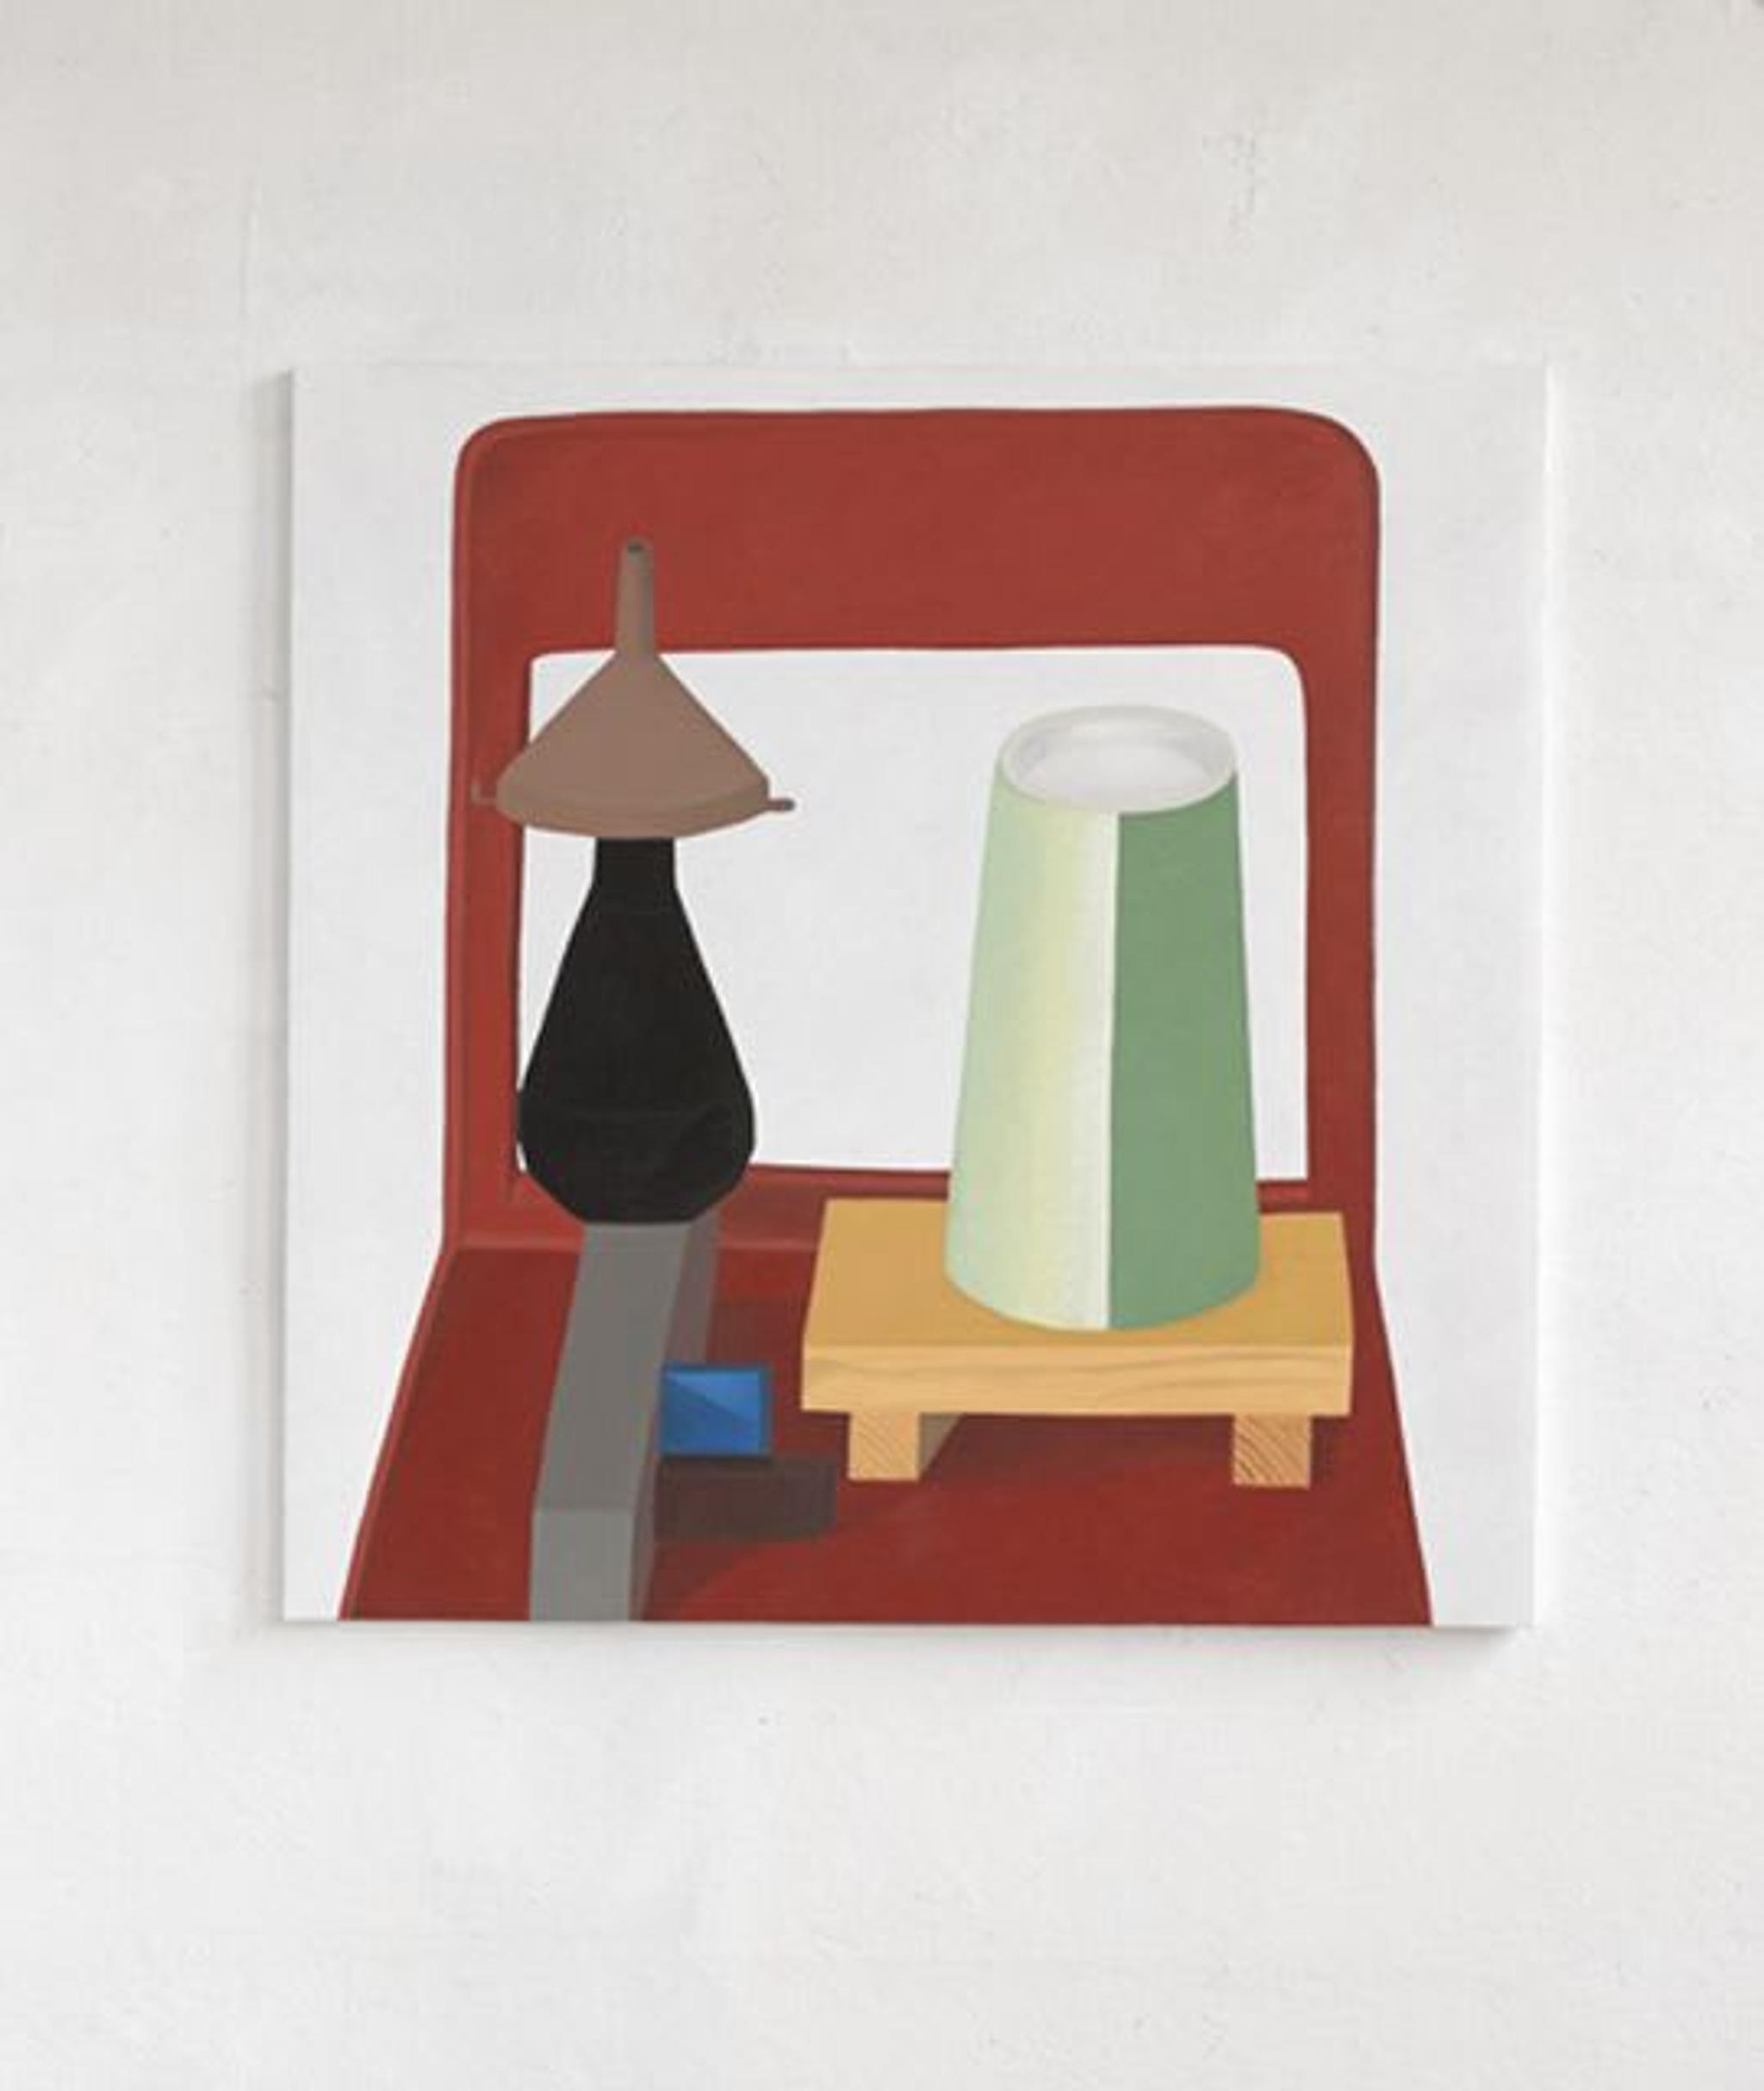 Still Life on a Chair 2 Oil on Canvas Painting by Nathalie Du Pasquier, 2014